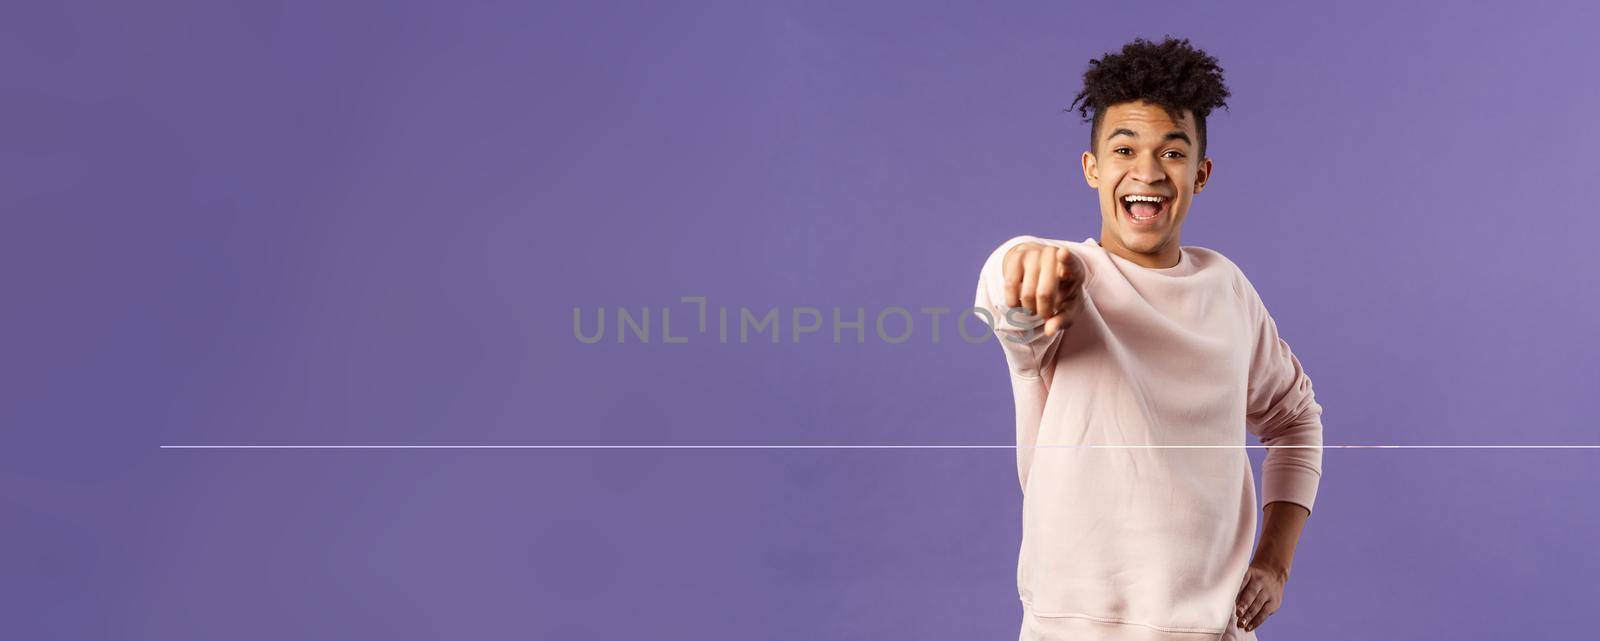 Portrait of outgoing happy hispanic male student making his choice, laughing over something extremely funny point finger at camera with amused smile, standing purple background.